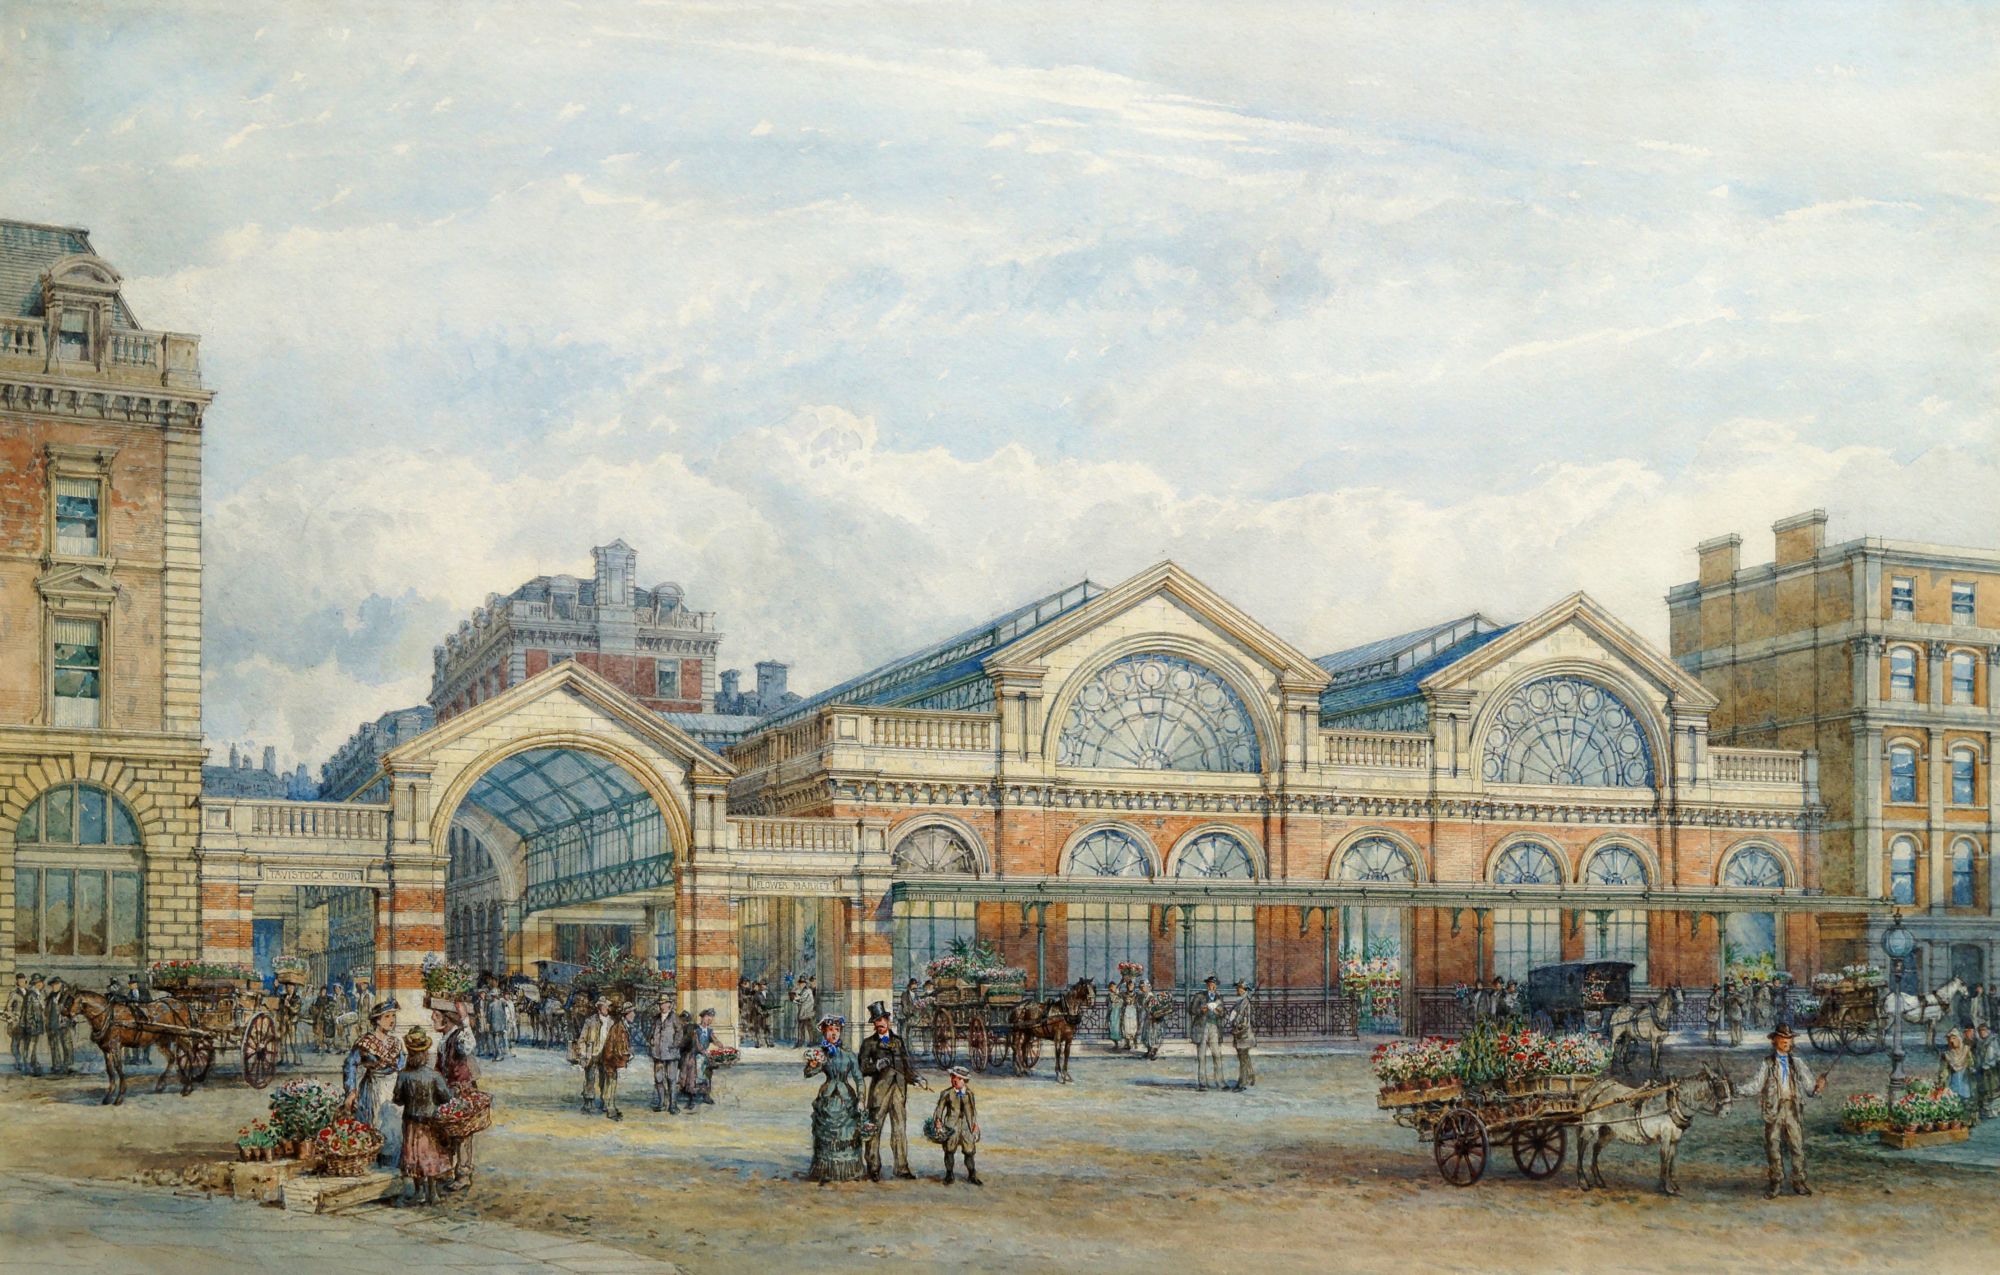 William Rogers, British act 1870's- A perspective view of the Flower Market, Covent Garden;pen and